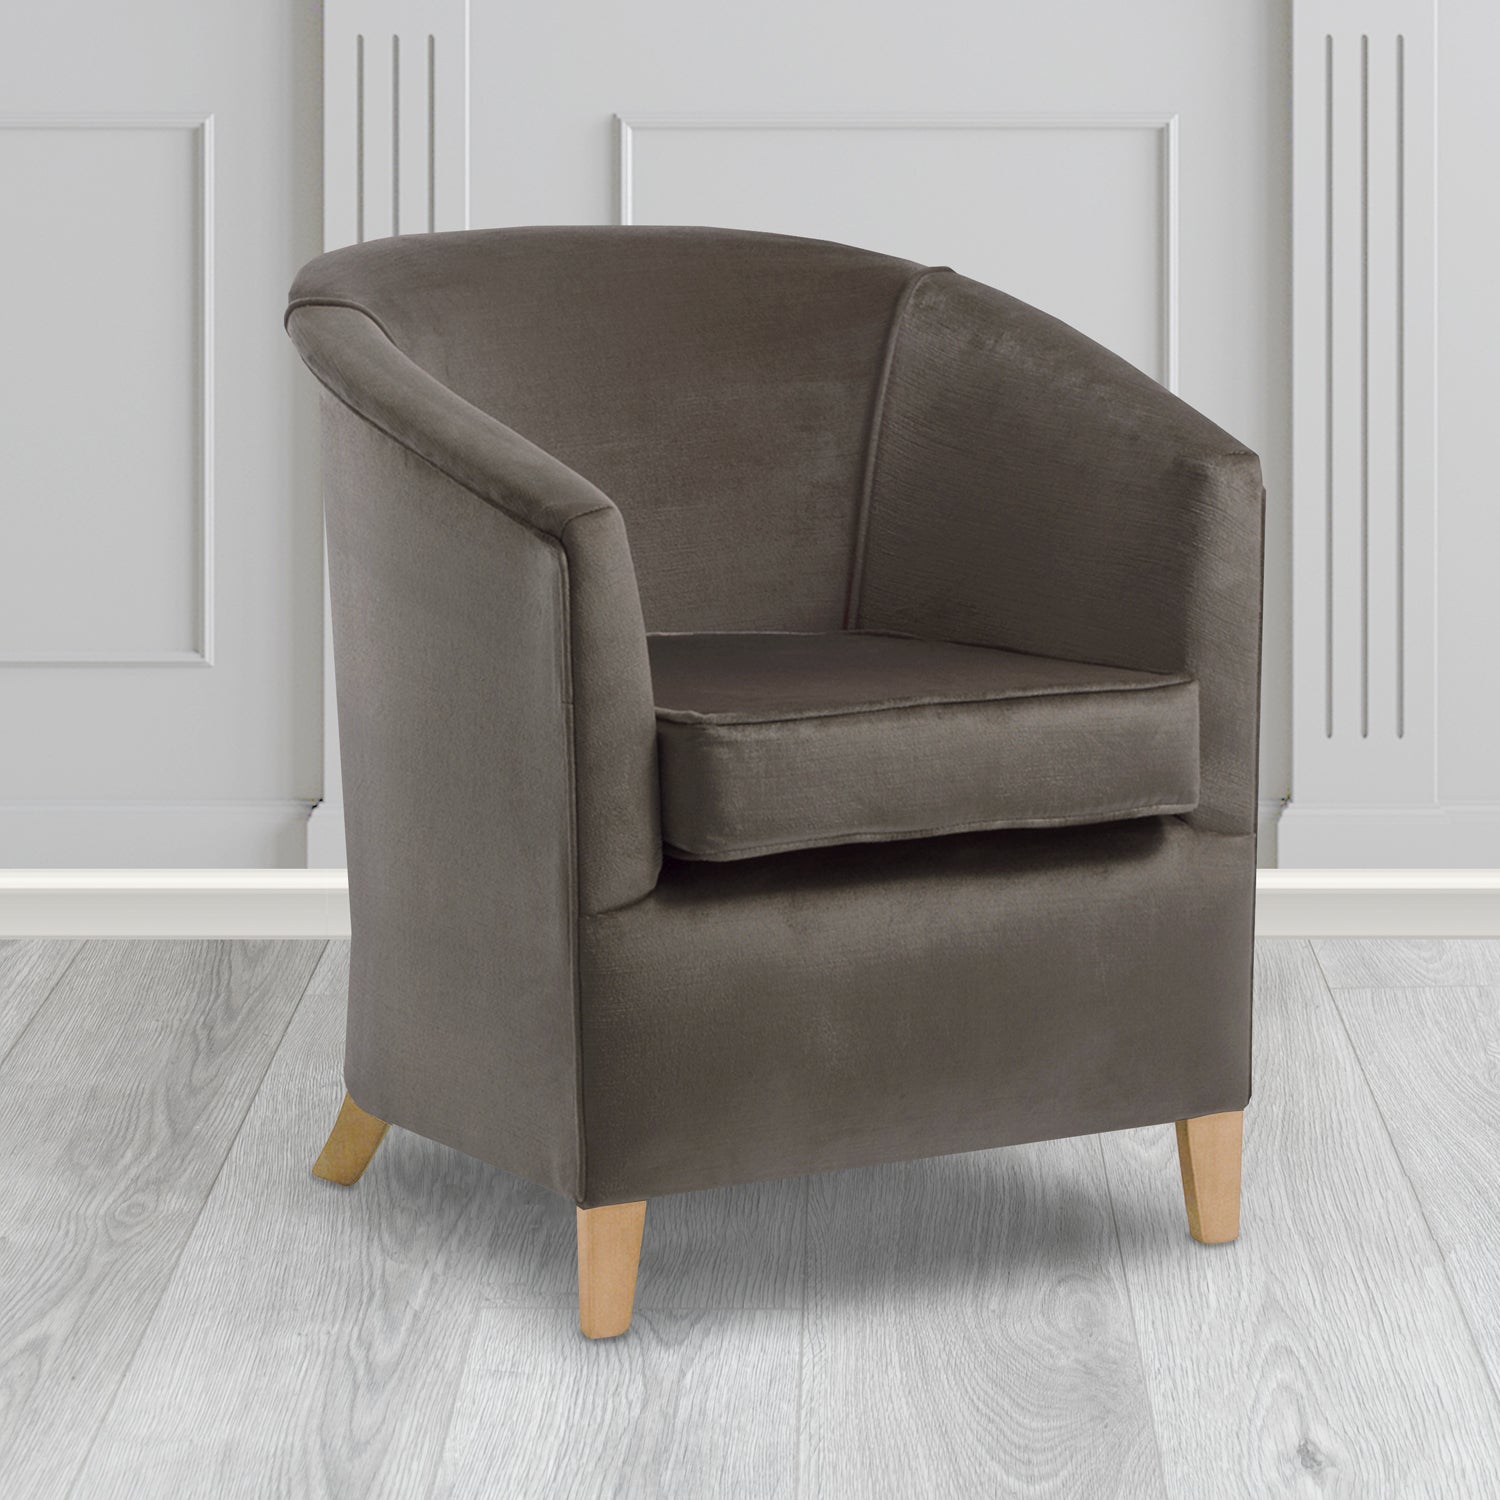 Jasmine Tub Chair in Noble 956 Lead Crib 5 Velvet Fabric - Water Resistant - The Tub Chair Shop